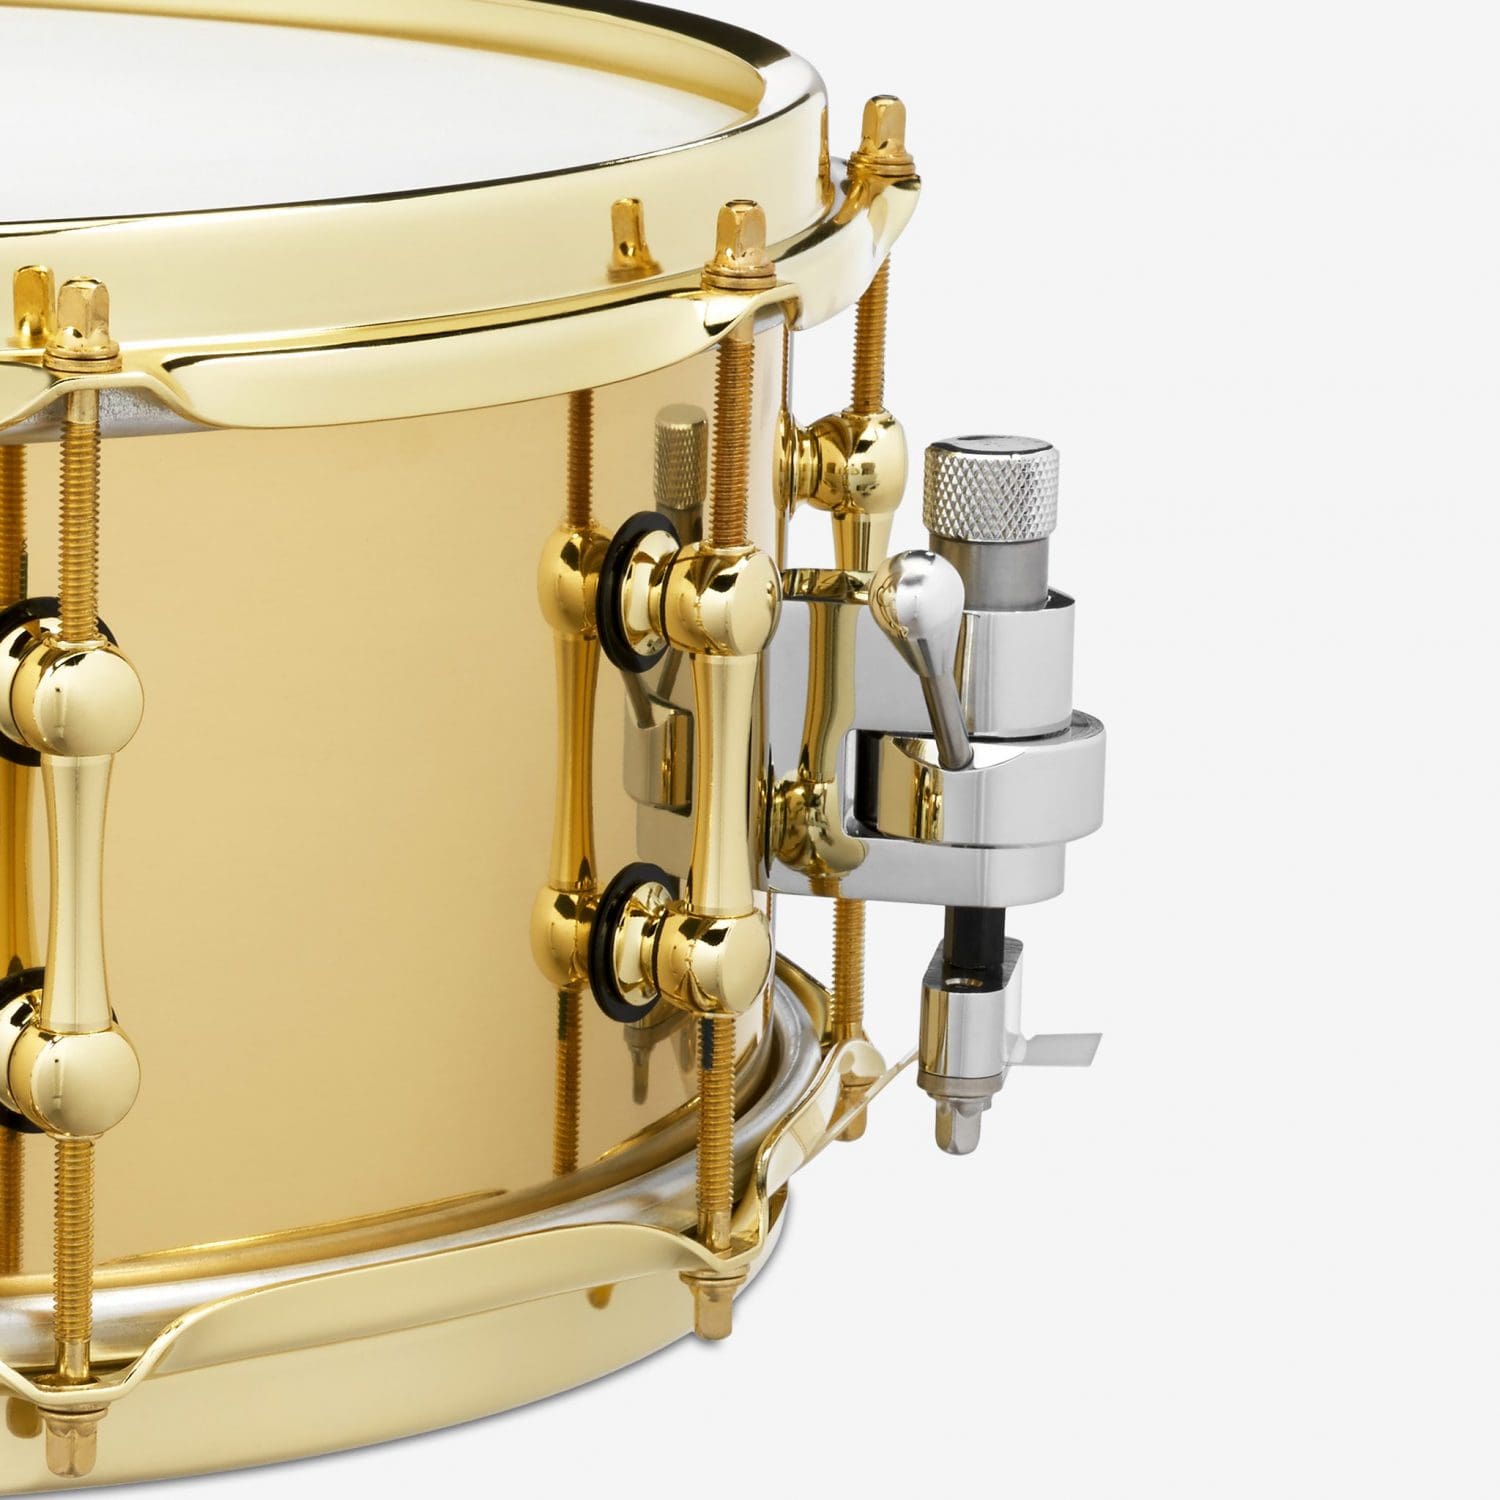 Polished Bell Brass Snare Drum